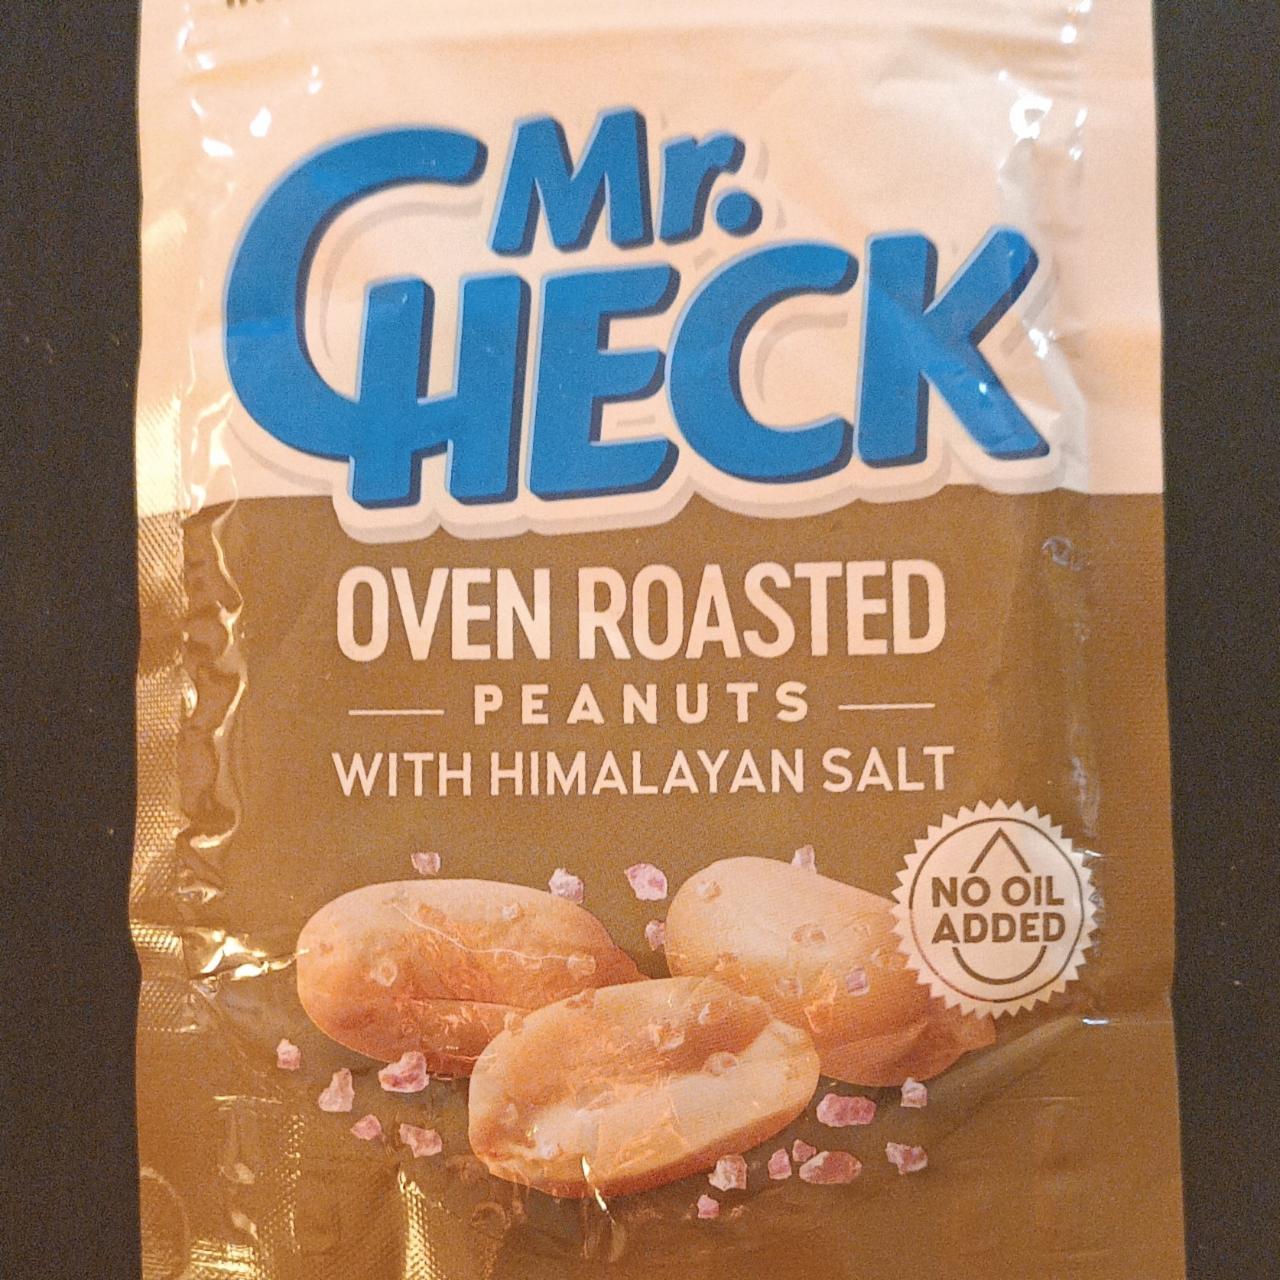 Fotografie - Oven roasted peanuts with himalayan salt Mr. Check